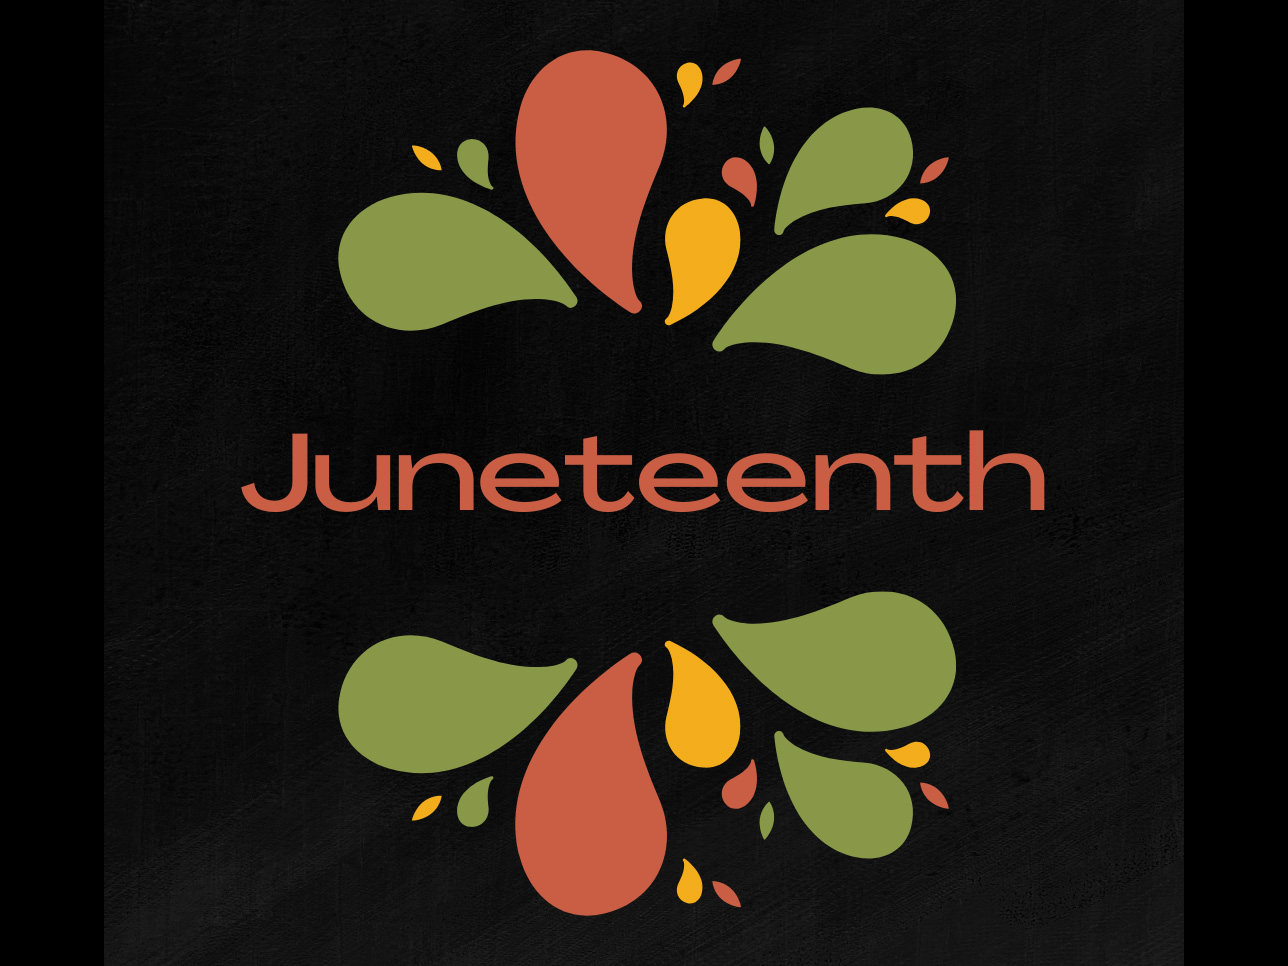 Juneteenth with red, green, and yellow flower petal graphic